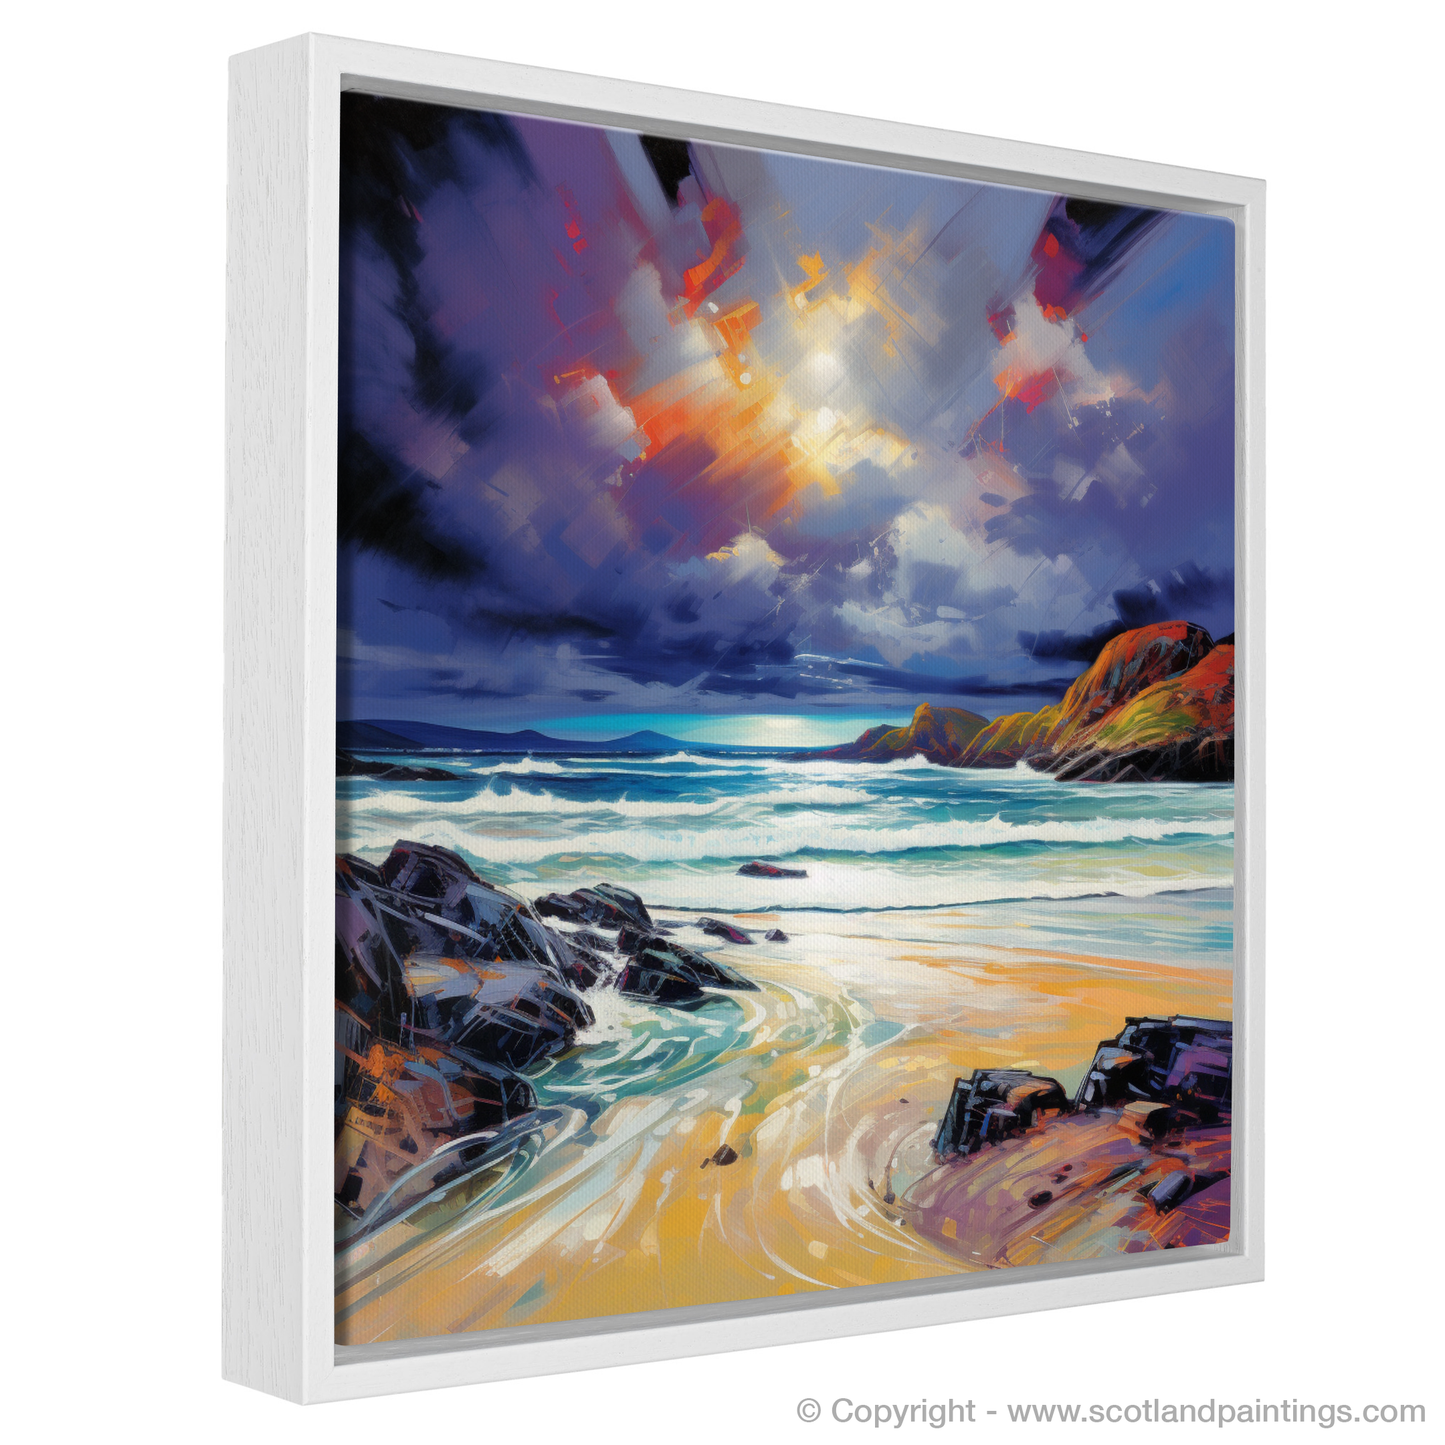 Storm Over Achmelvich Bay: A Fauvist Homage to Scottish Shores